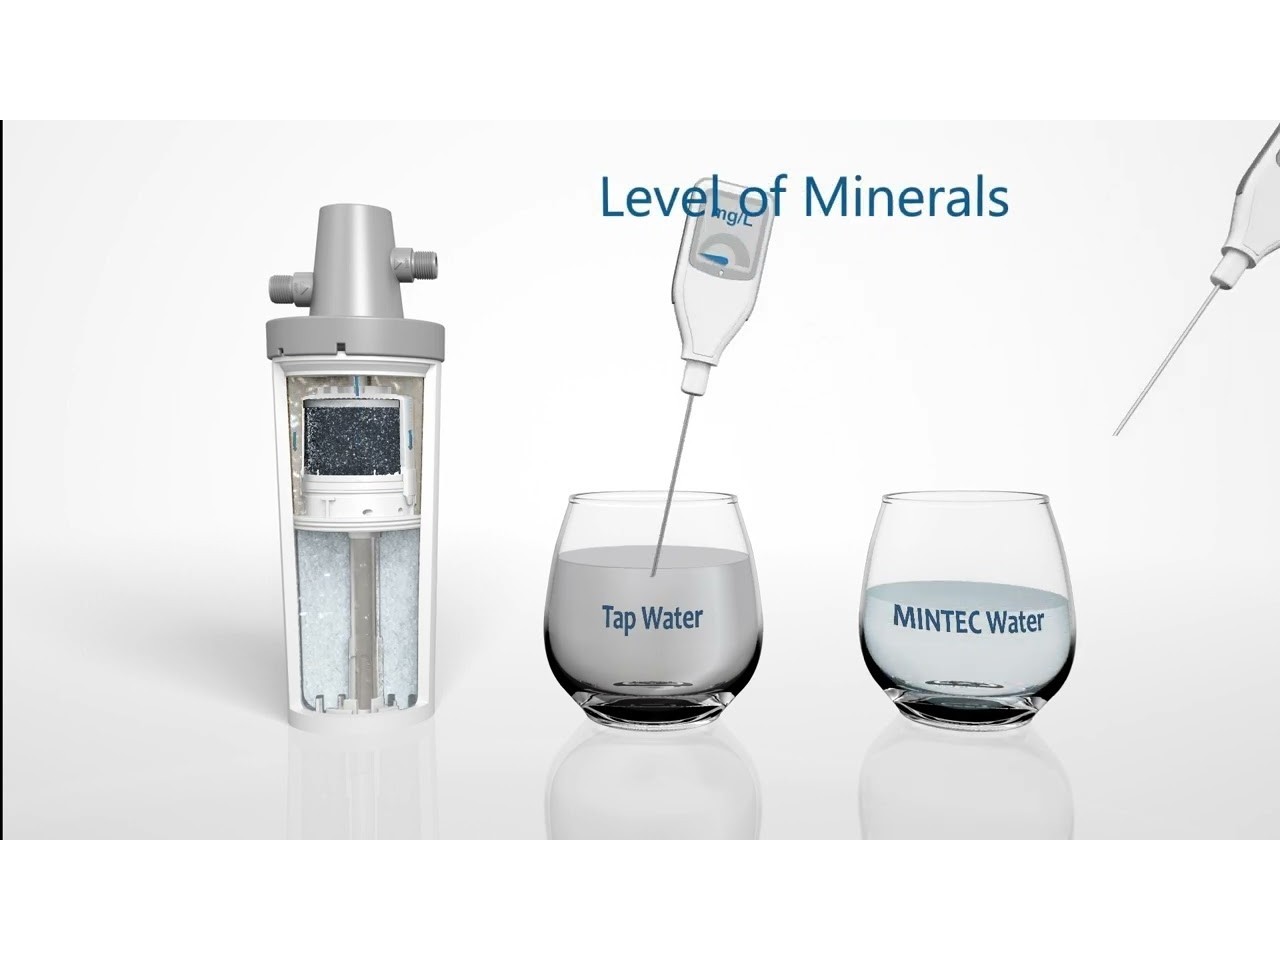 Mintec Mineral Filter Introduction